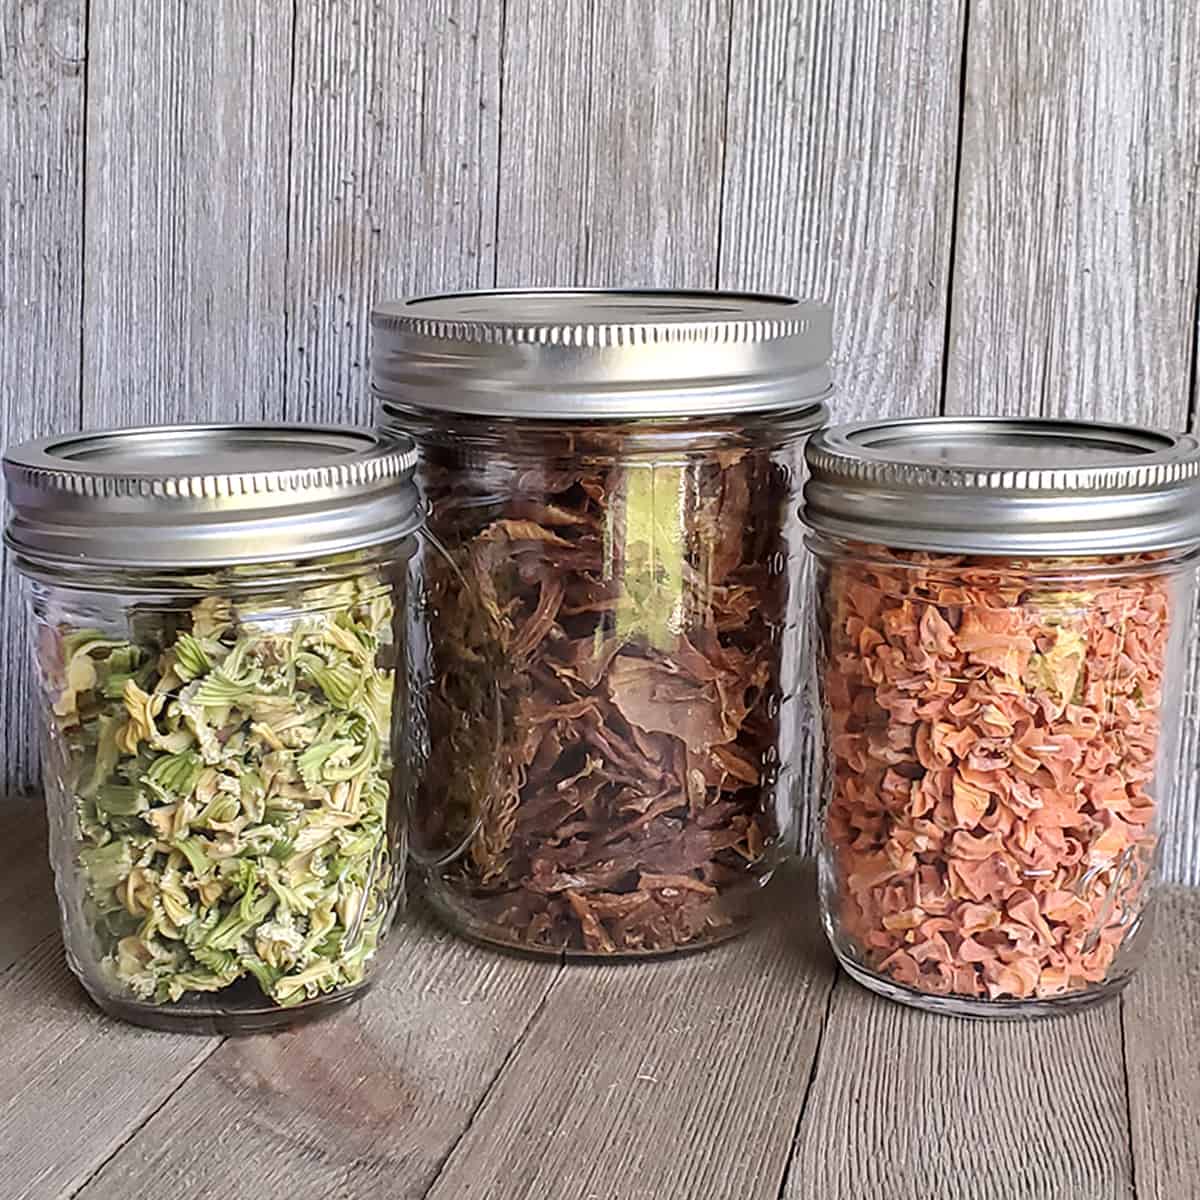 Jars of dried celery, onions and carrots on wooden backgrounds